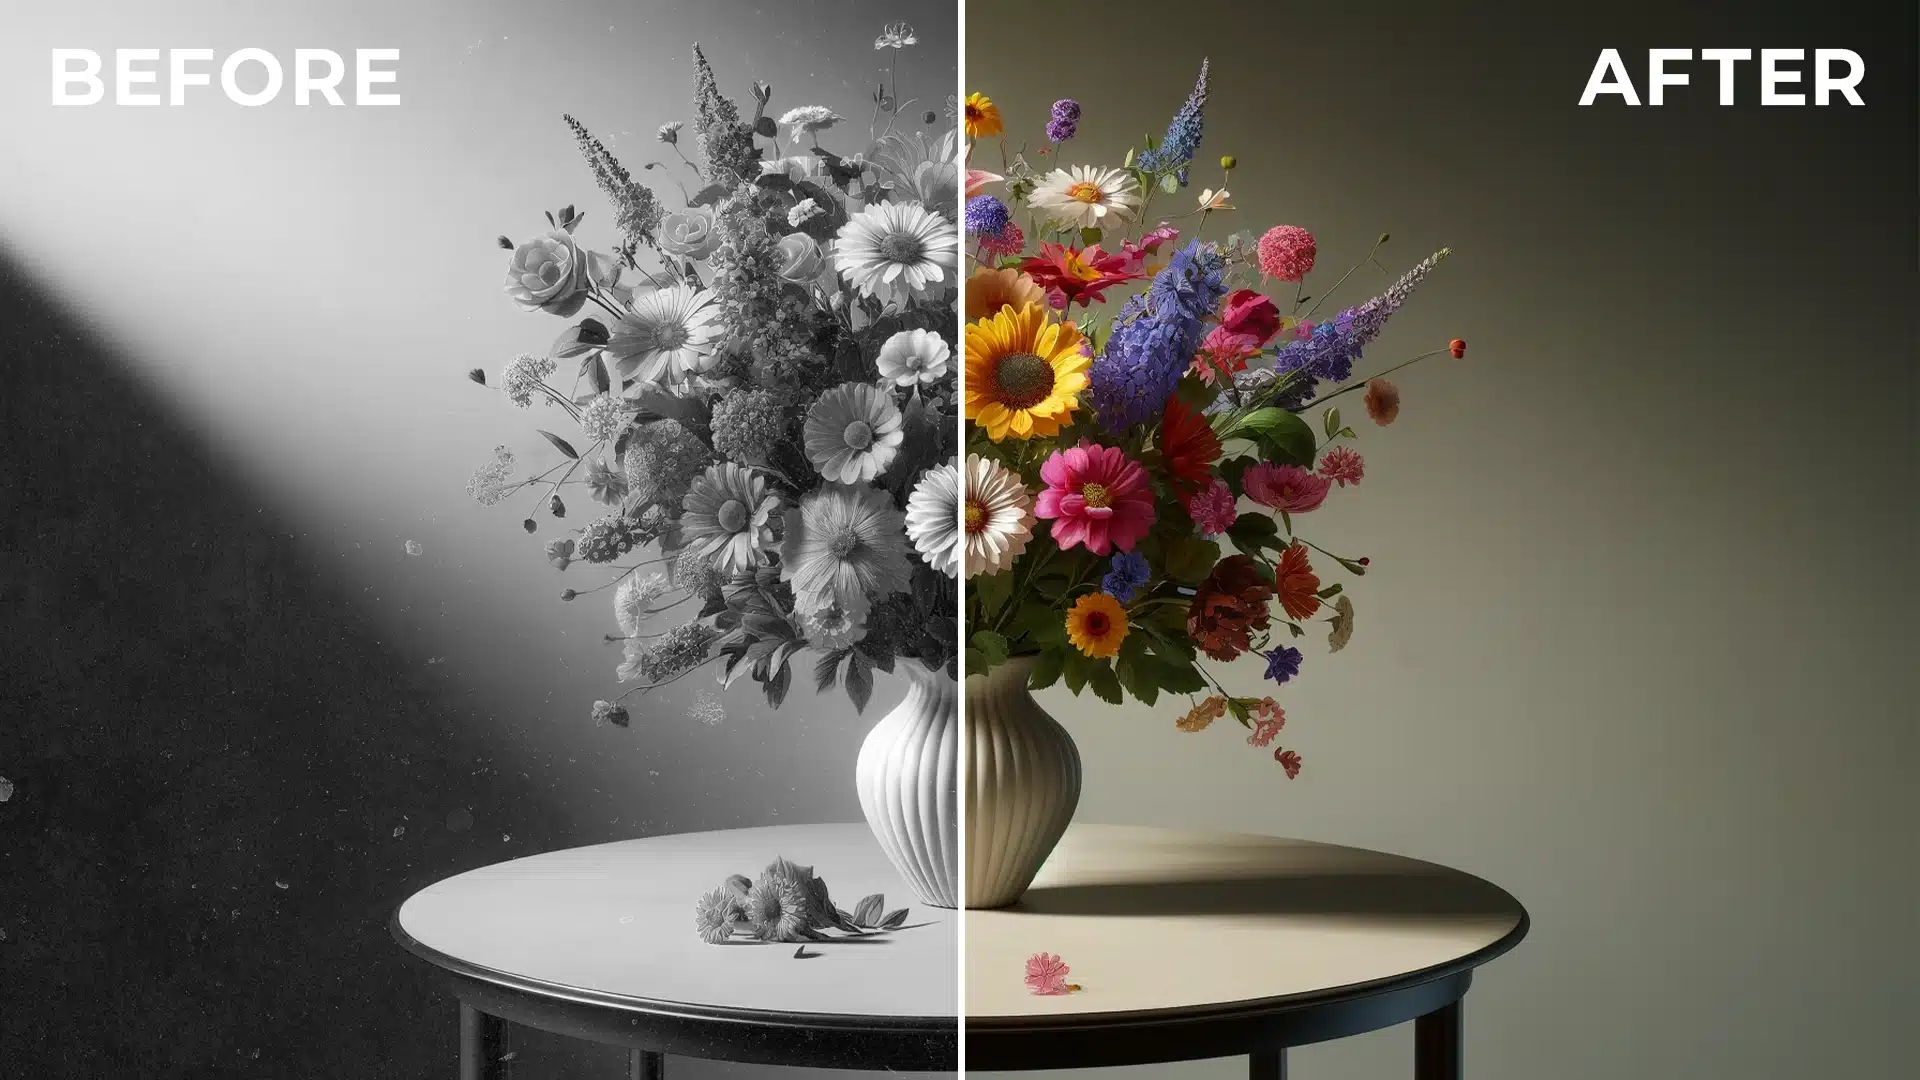 A before and after comparison photo of a bouquet on a table, with the left half in black and white and the right half in vibrant color.